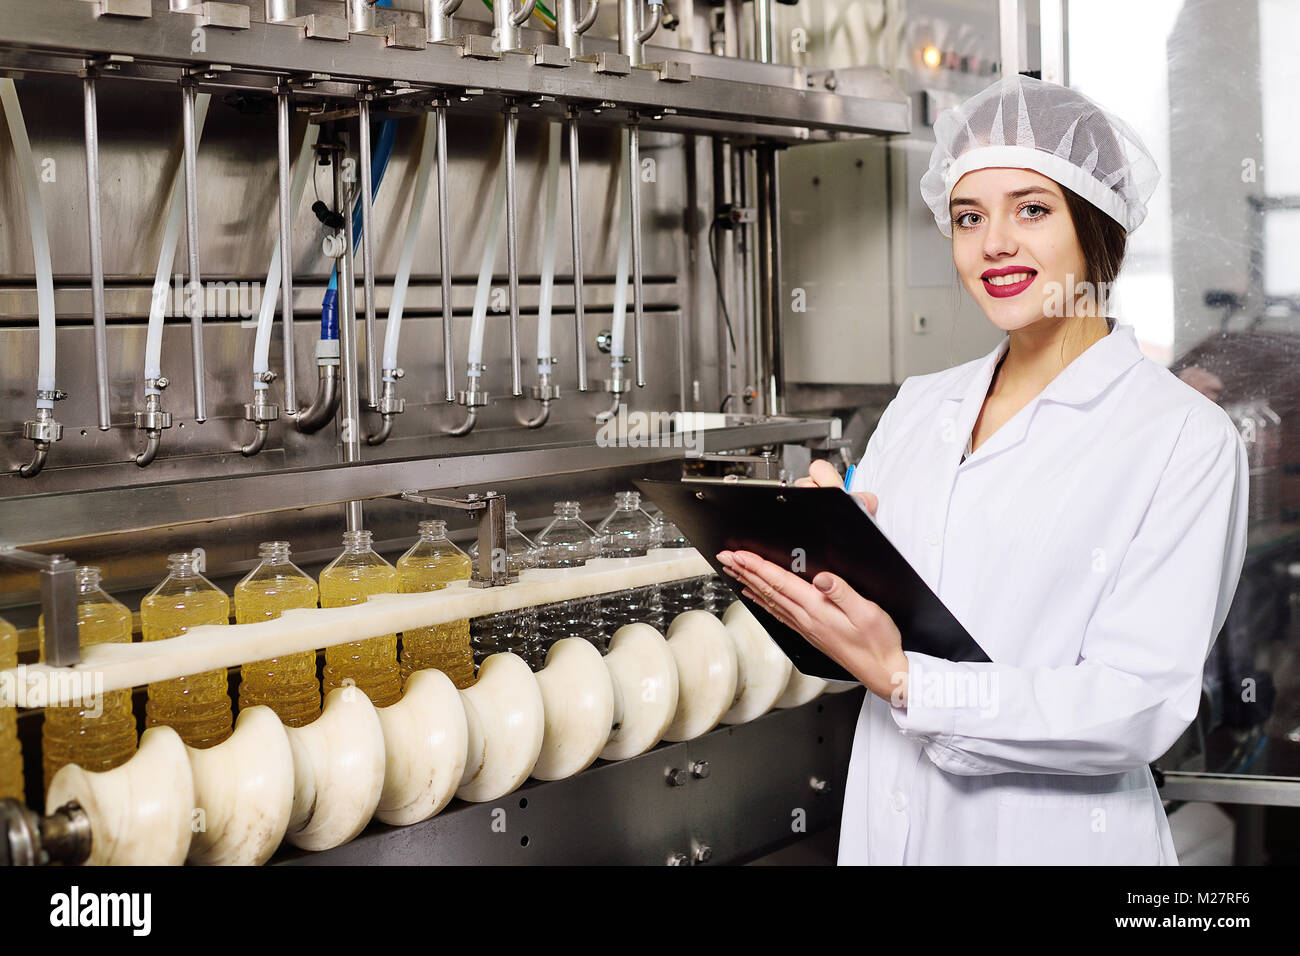 line of food production of refined sunflower oil. Stock Photo